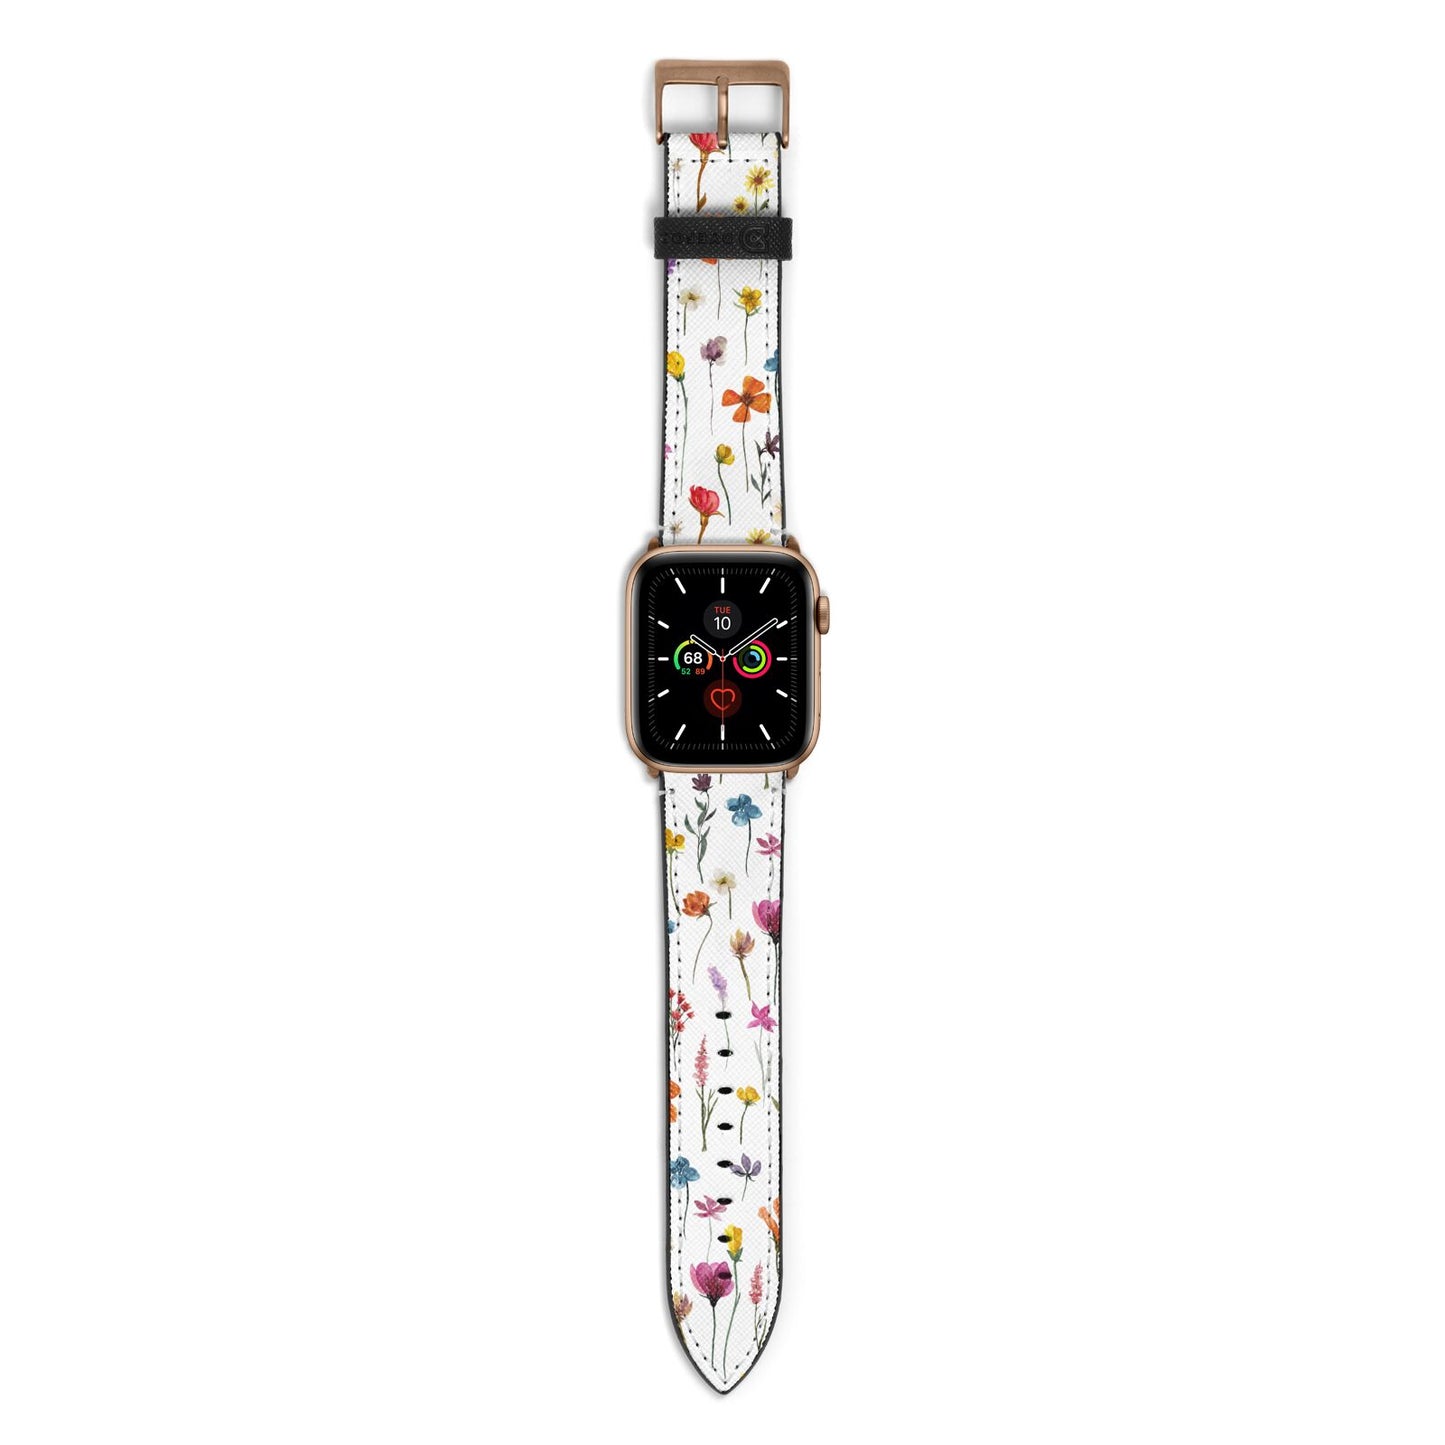 Botanical Floral Apple Watch Strap with Gold Hardware